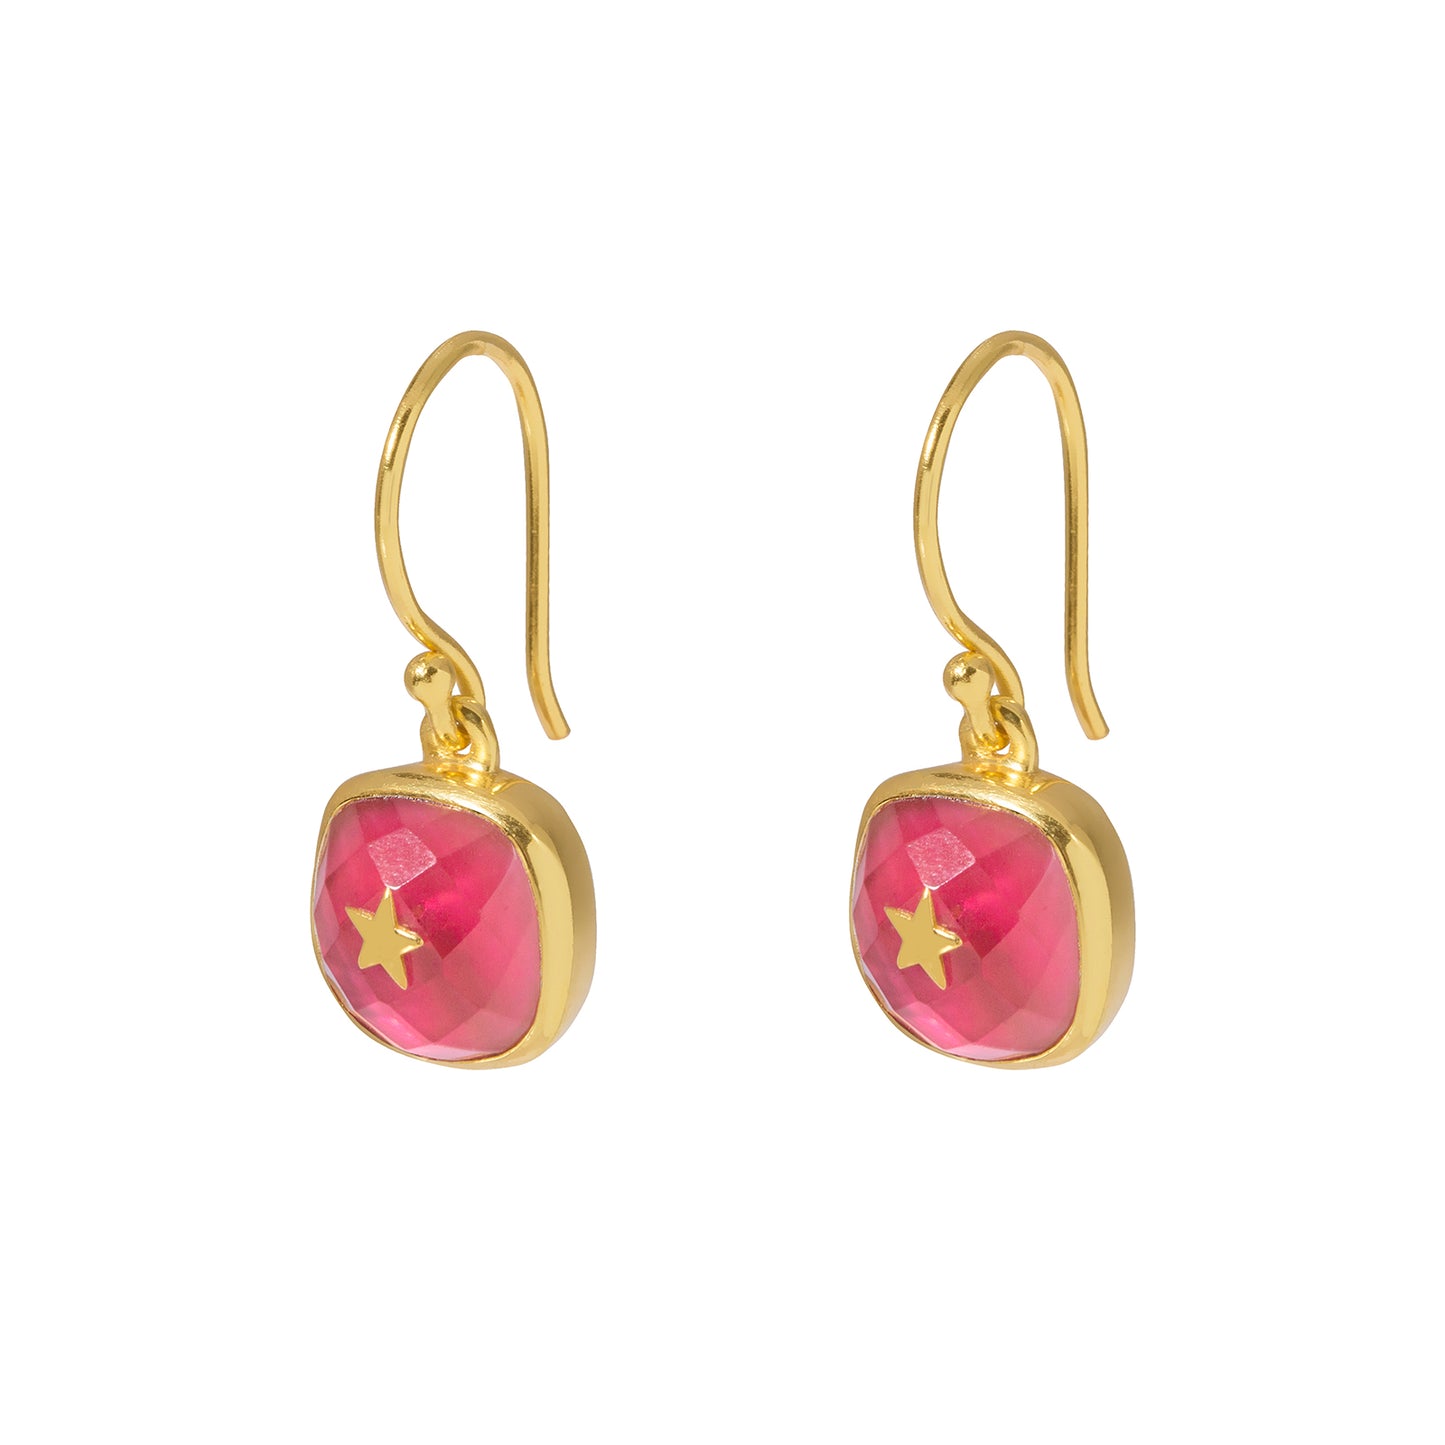 Pearlised Fuchsia pink star earrings representing Purity, Confidence, Self Worth